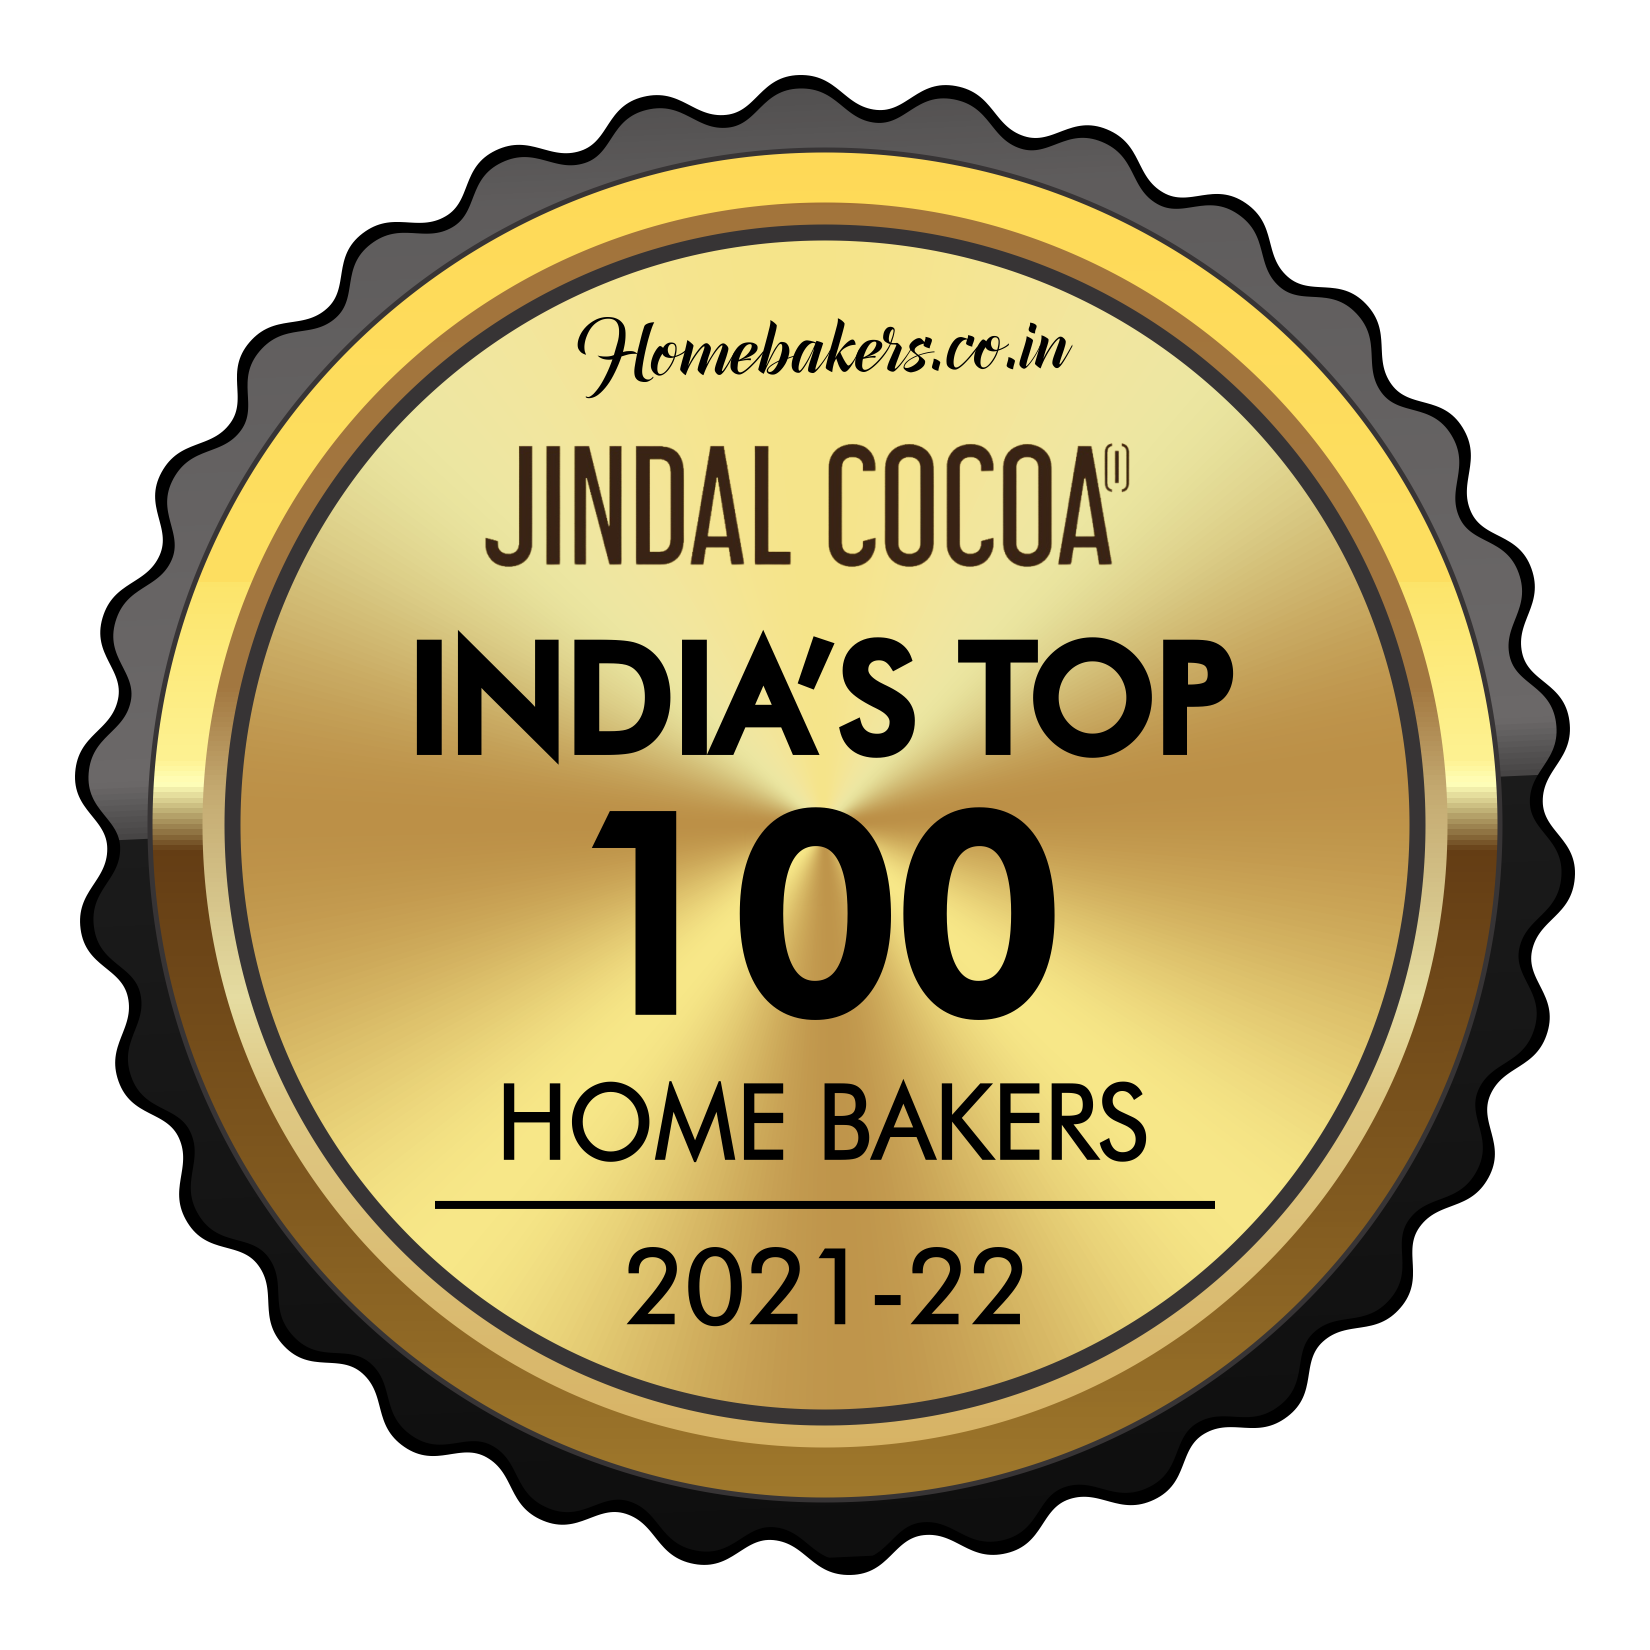 India's Top Home Bakers